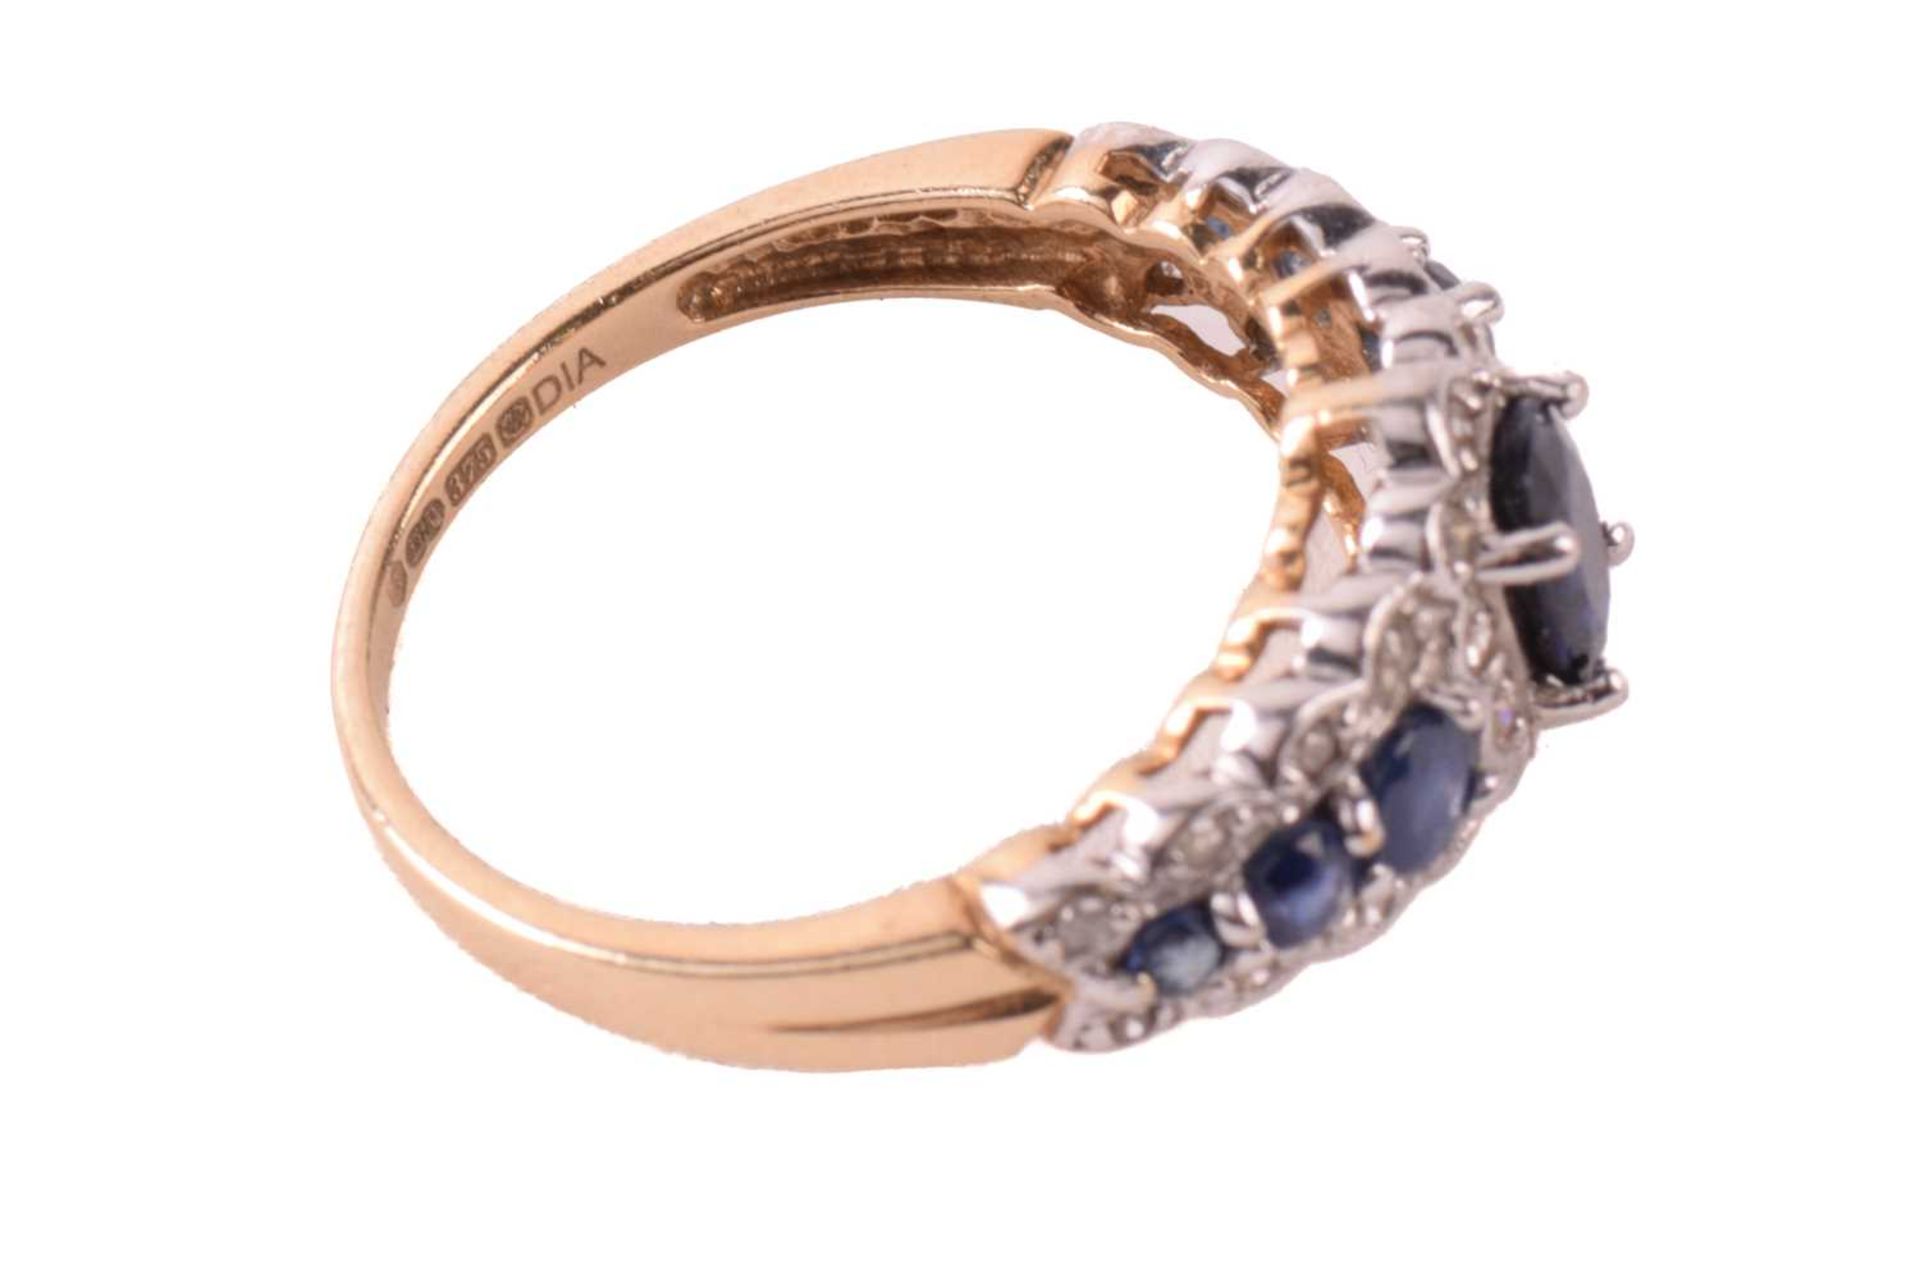 A sapphire and diamond dress ring in 9ct gold, claw-set with an oval-cut sapphire of 6.1 x 4.3 mm - Image 4 of 6